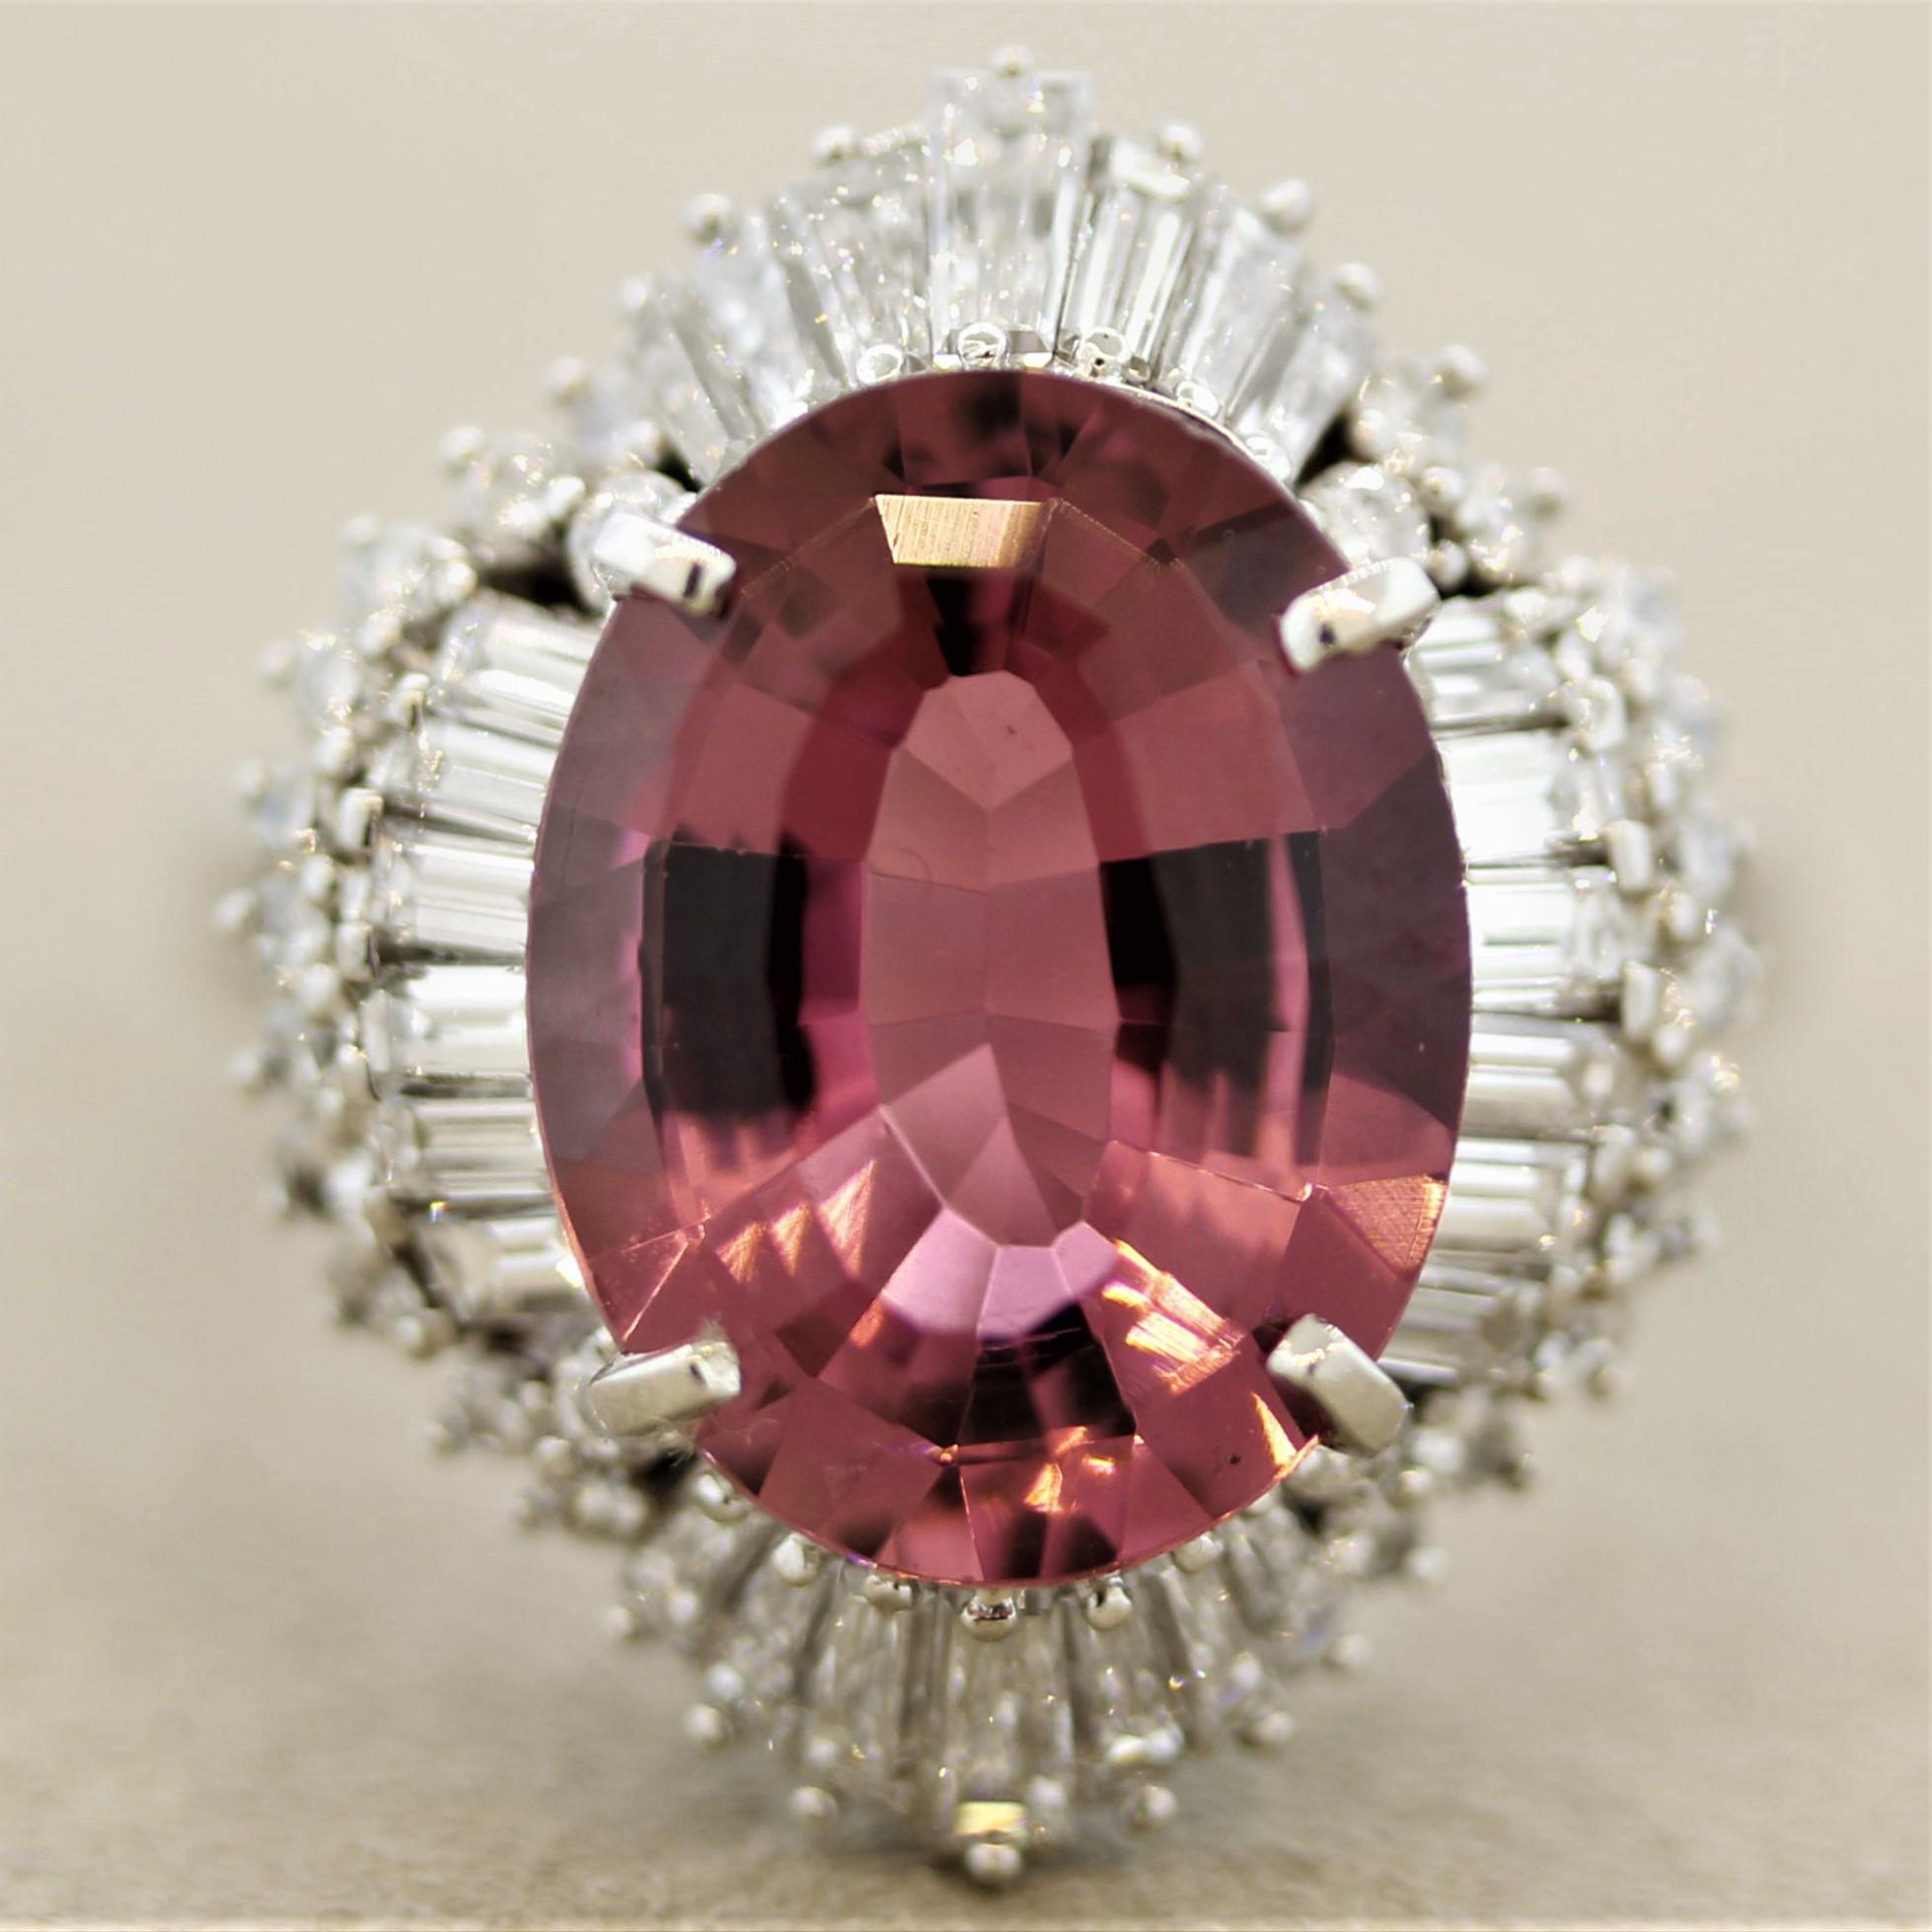 A fine, well-crafted ring featuring a fine gem of a tourmaline. It weighs 6.67 carats and has a rich yet bright pink color that soothes the soul. It is accented by 1.88 carats of fine round brilliant and baguette-cut diamonds set in a stylish